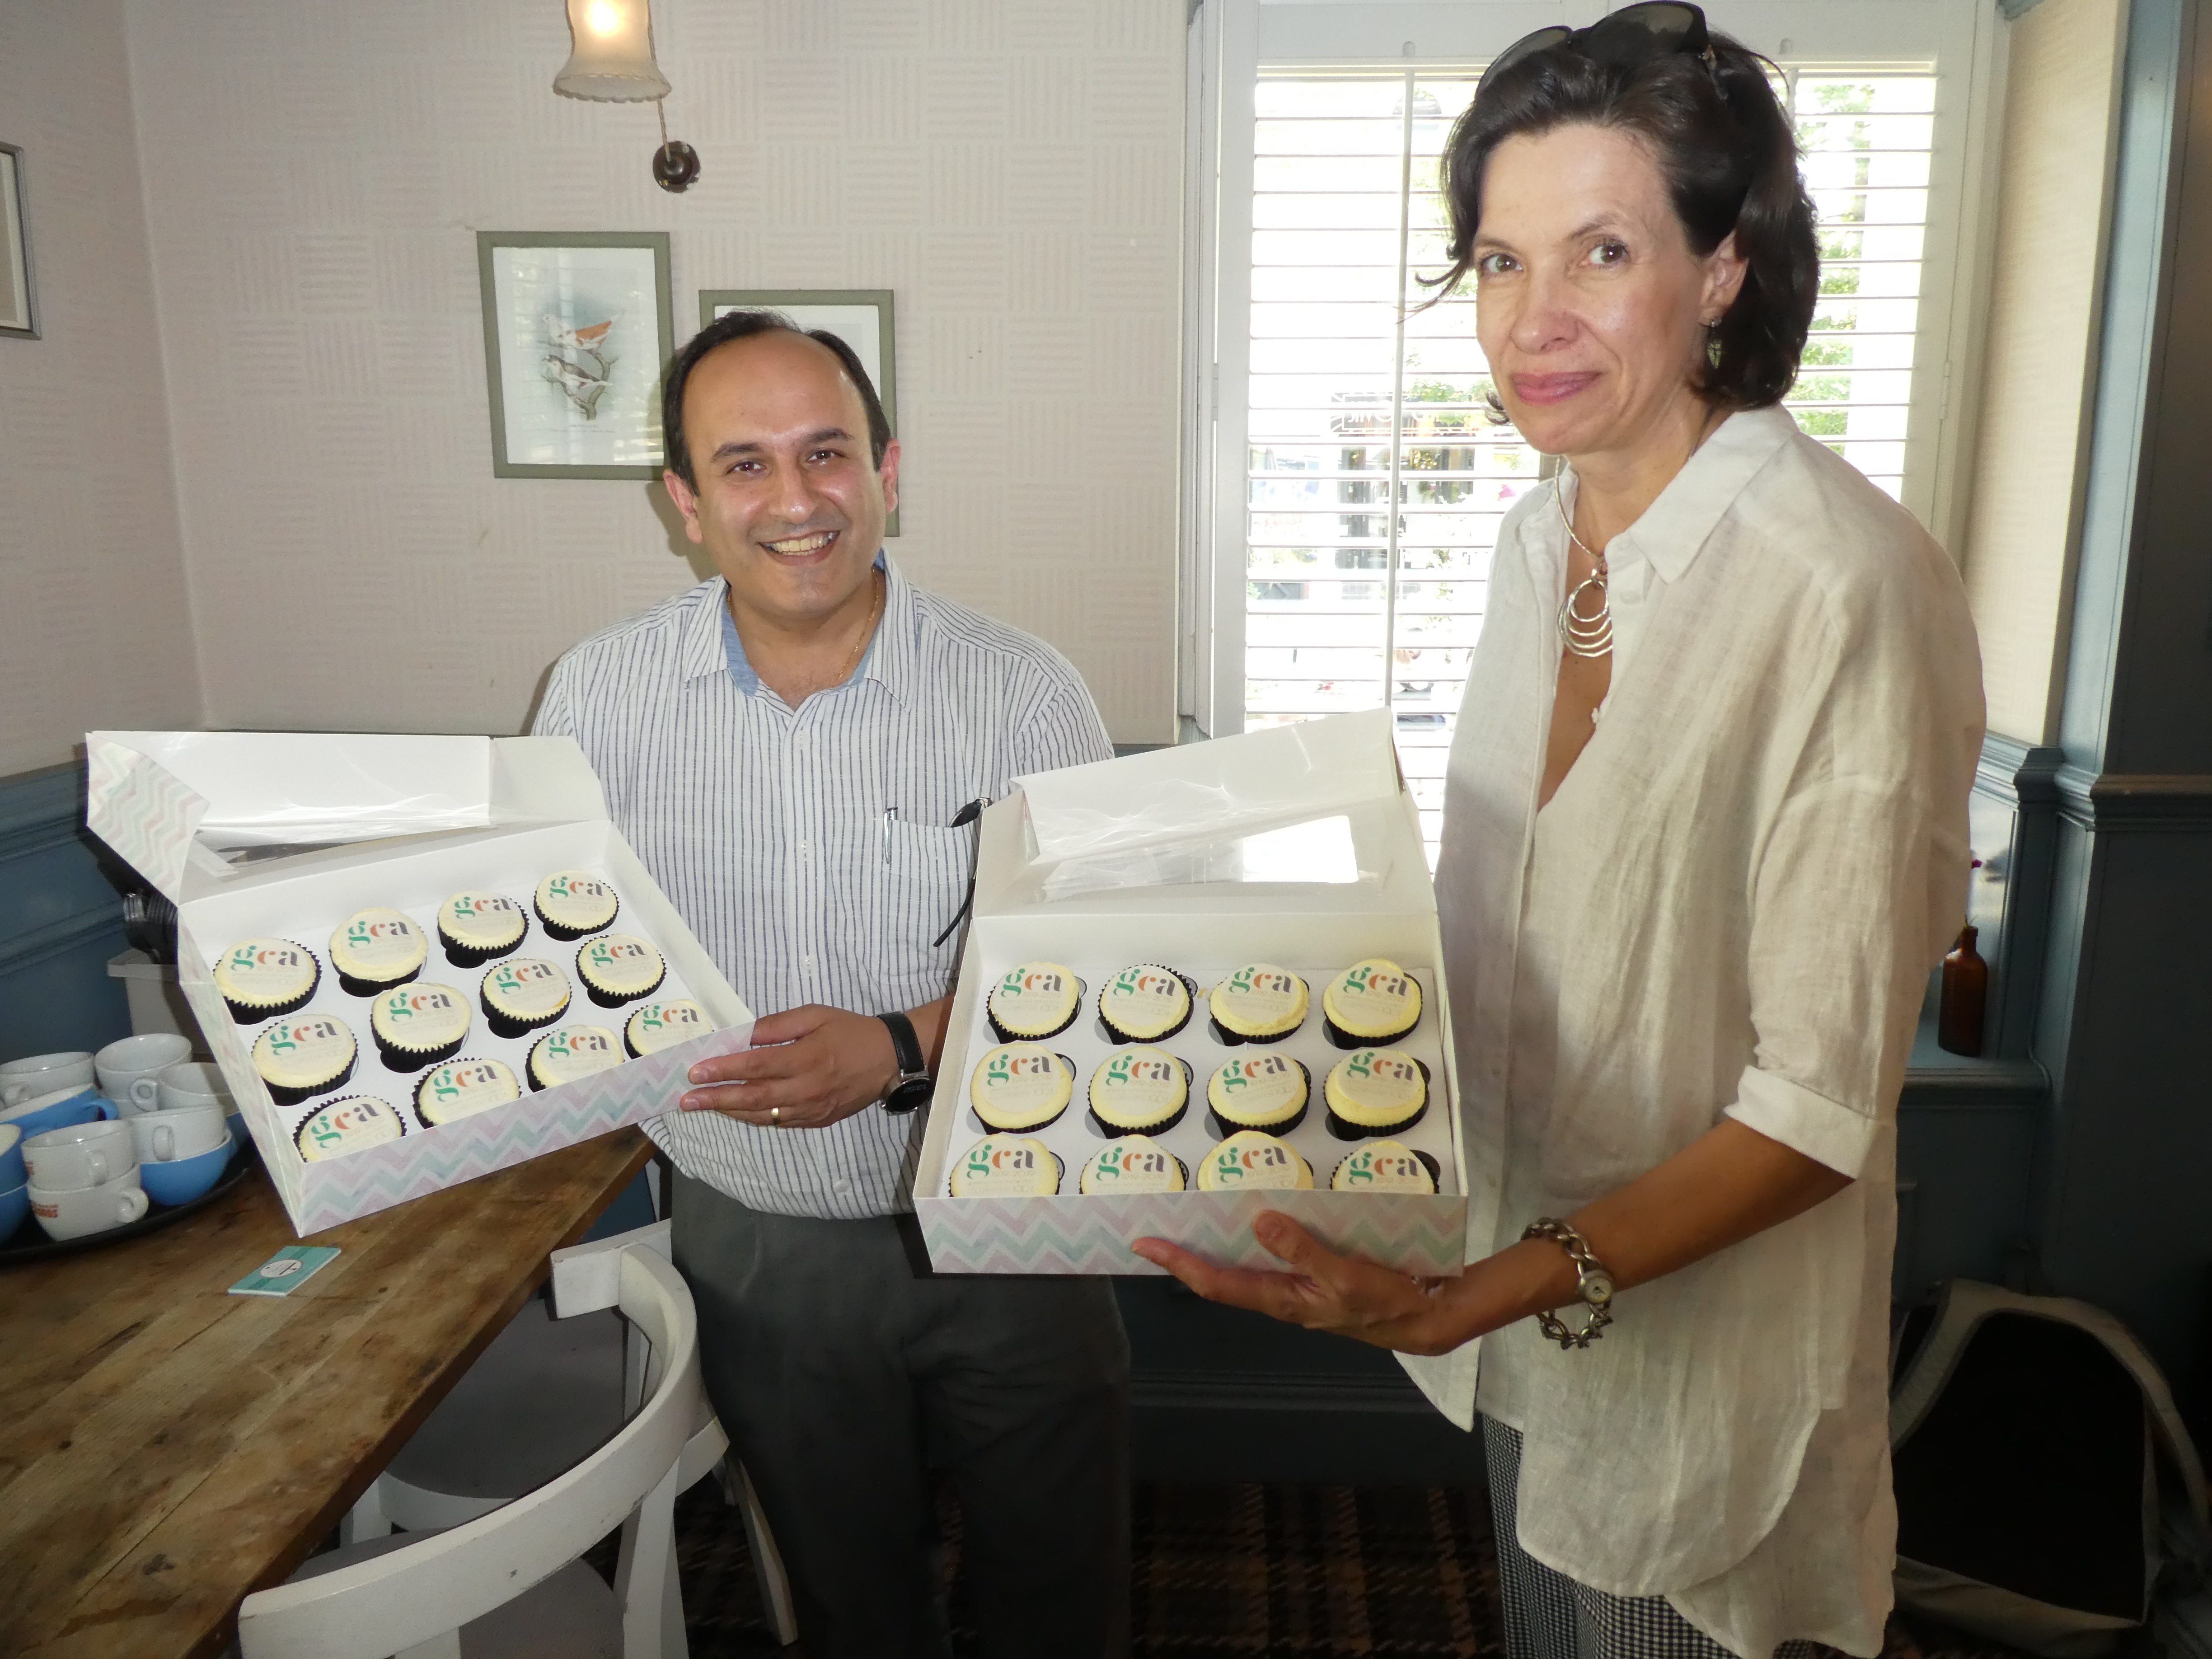 Above: Raj Arora of Davora with Amanda Fergusson, ceo of the GCA. Raj surprised everyone by producing special GCA cupcakes at the event, which took place in Heaton Moor, the Manchester suburb where Davora is based.